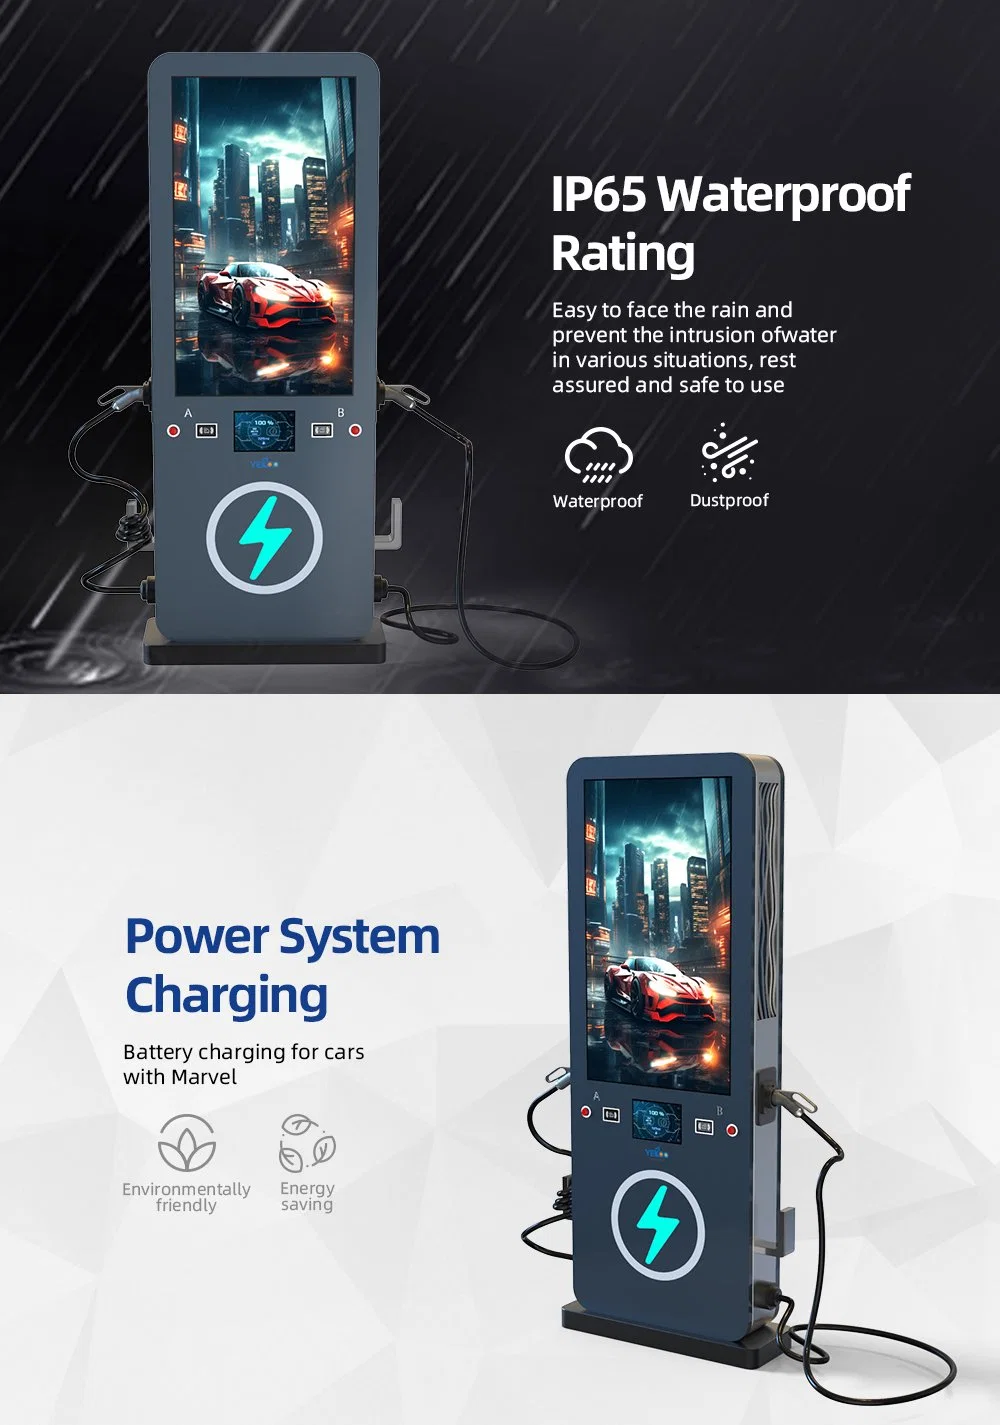 Yeroo 120 Kw Commercial DC EV Charging Station with Weatherproof LCD Advertising Display Digital Signage